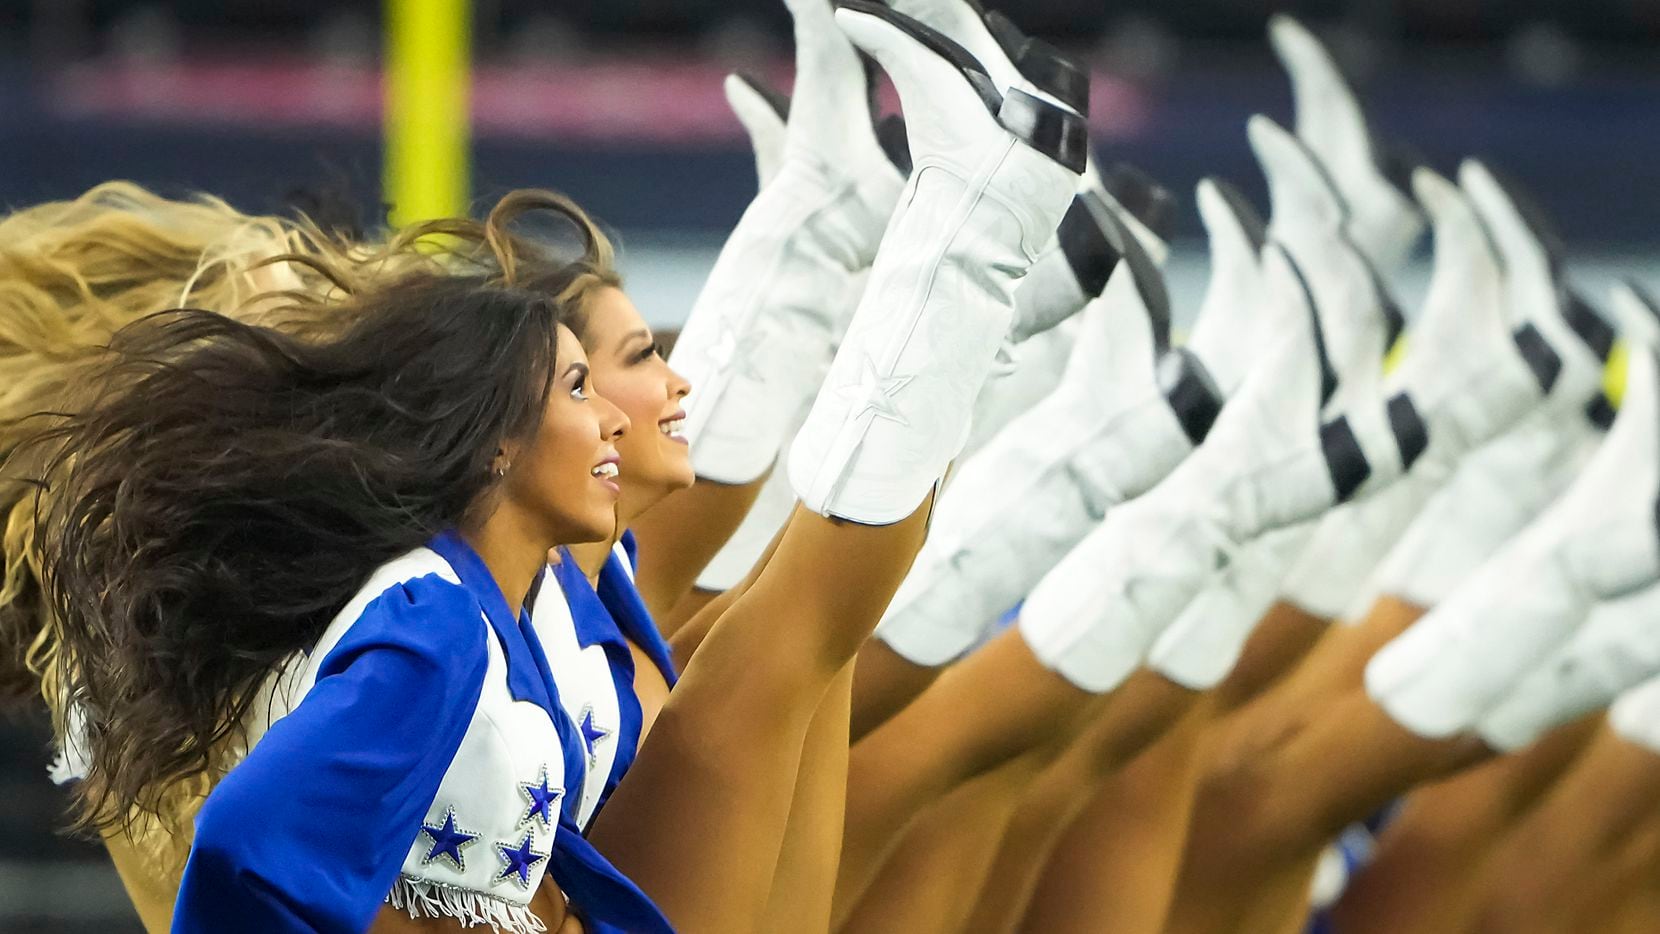 The Dallas Cowboys Cheerleaders perform before a preseason NFL football game against the Houston Texans at AT&T Stadium on Saturday, Aug. 21, 2021, in Arlington.